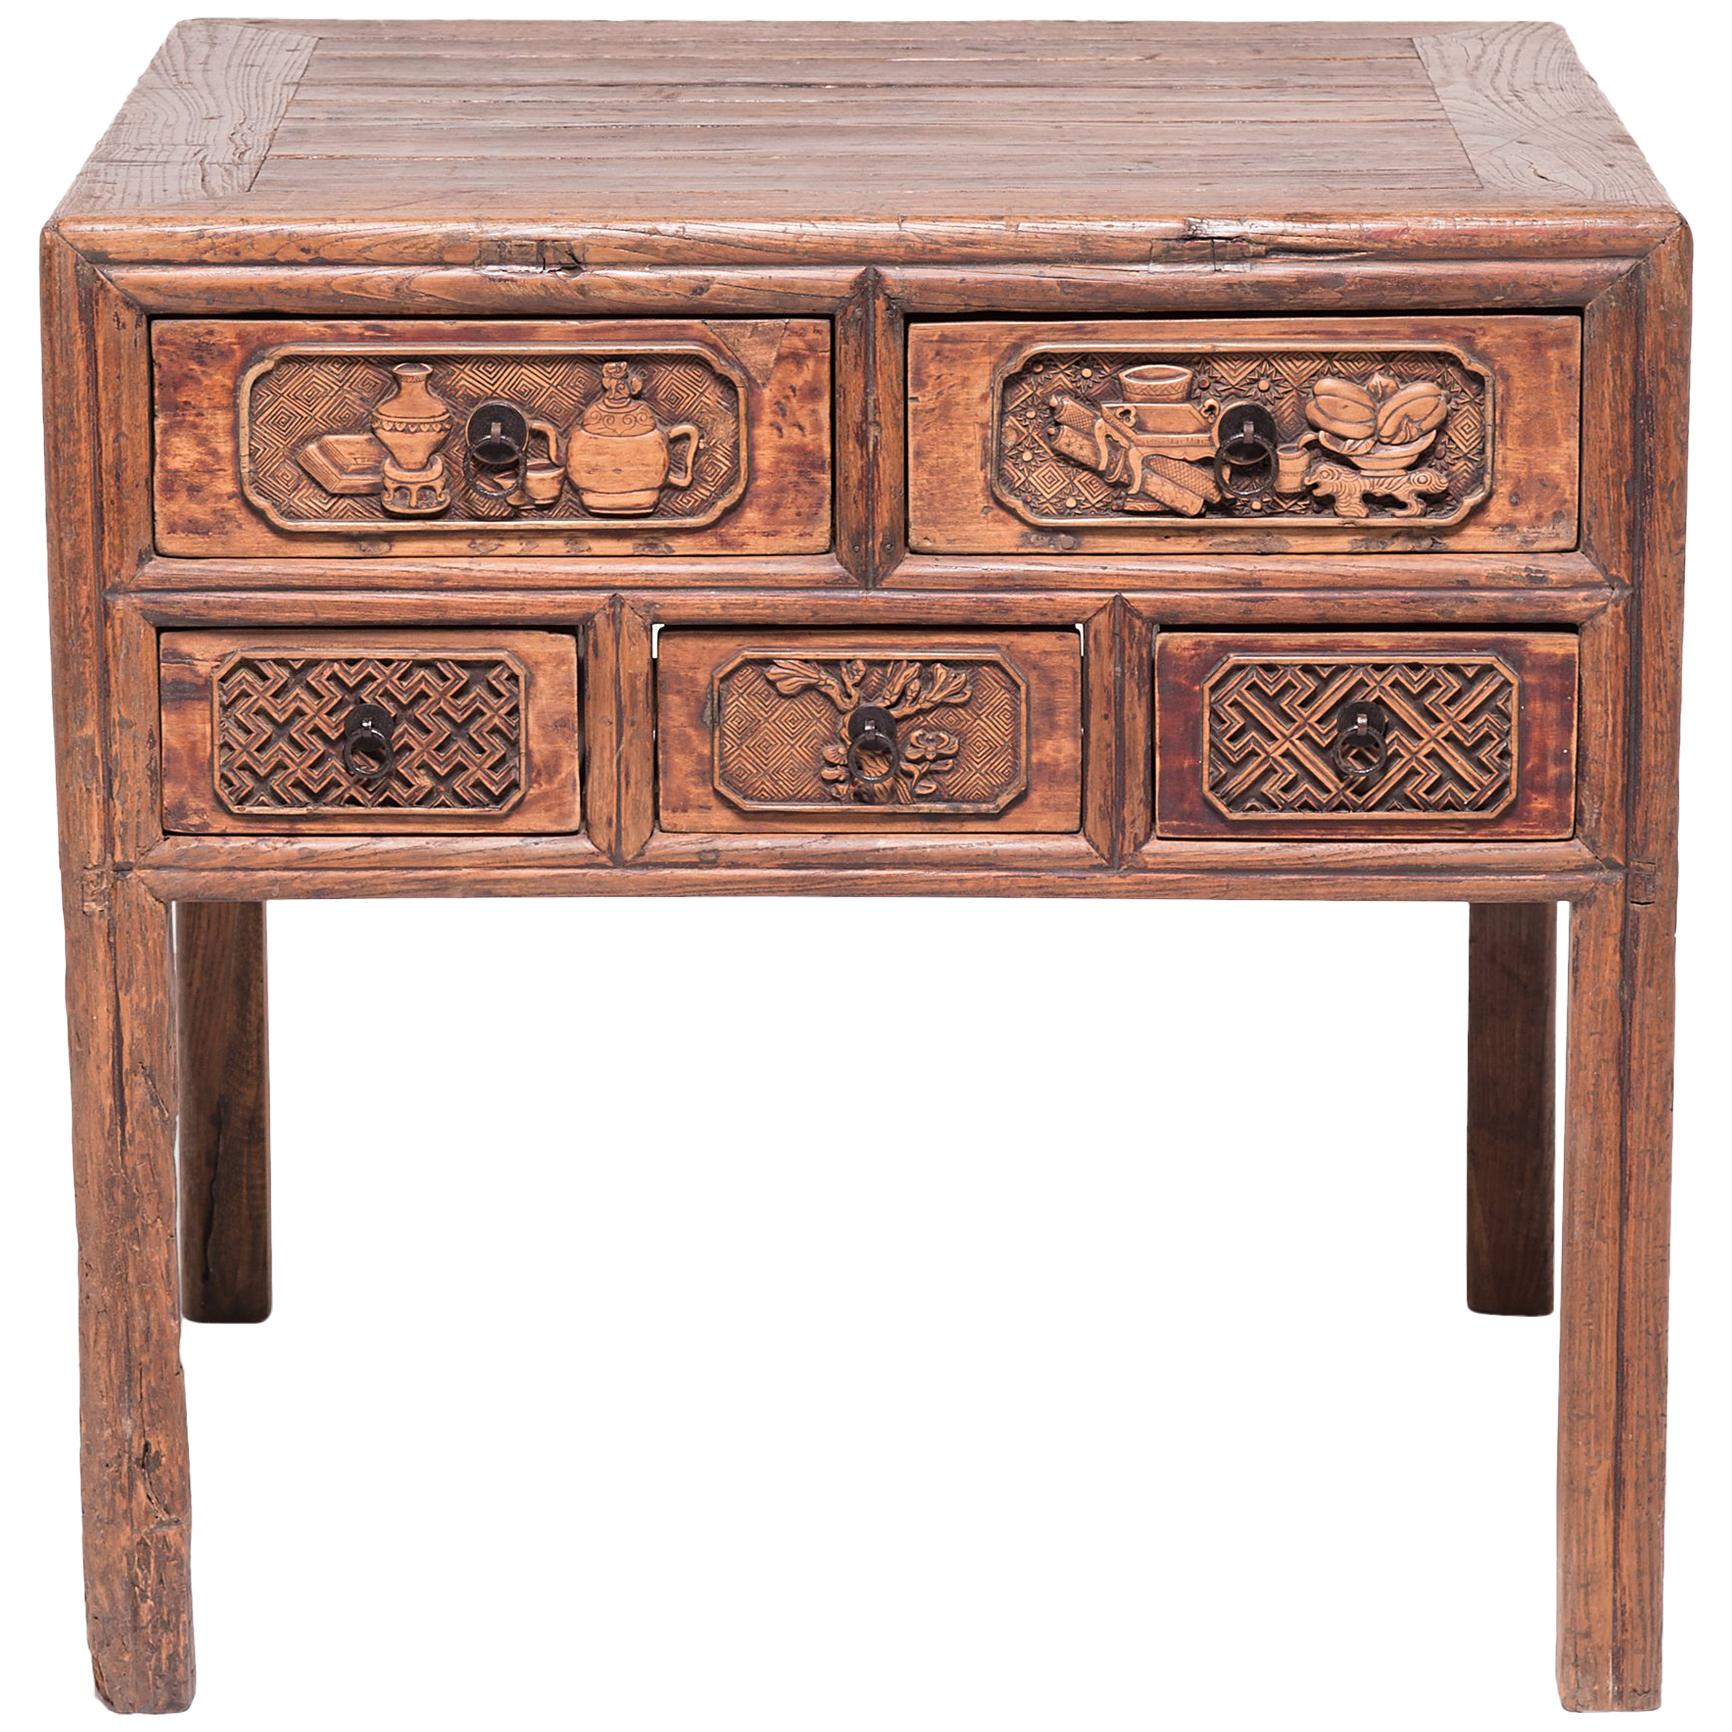 Chinese Ten-Drawer Offering Table, c. 1850 For Sale